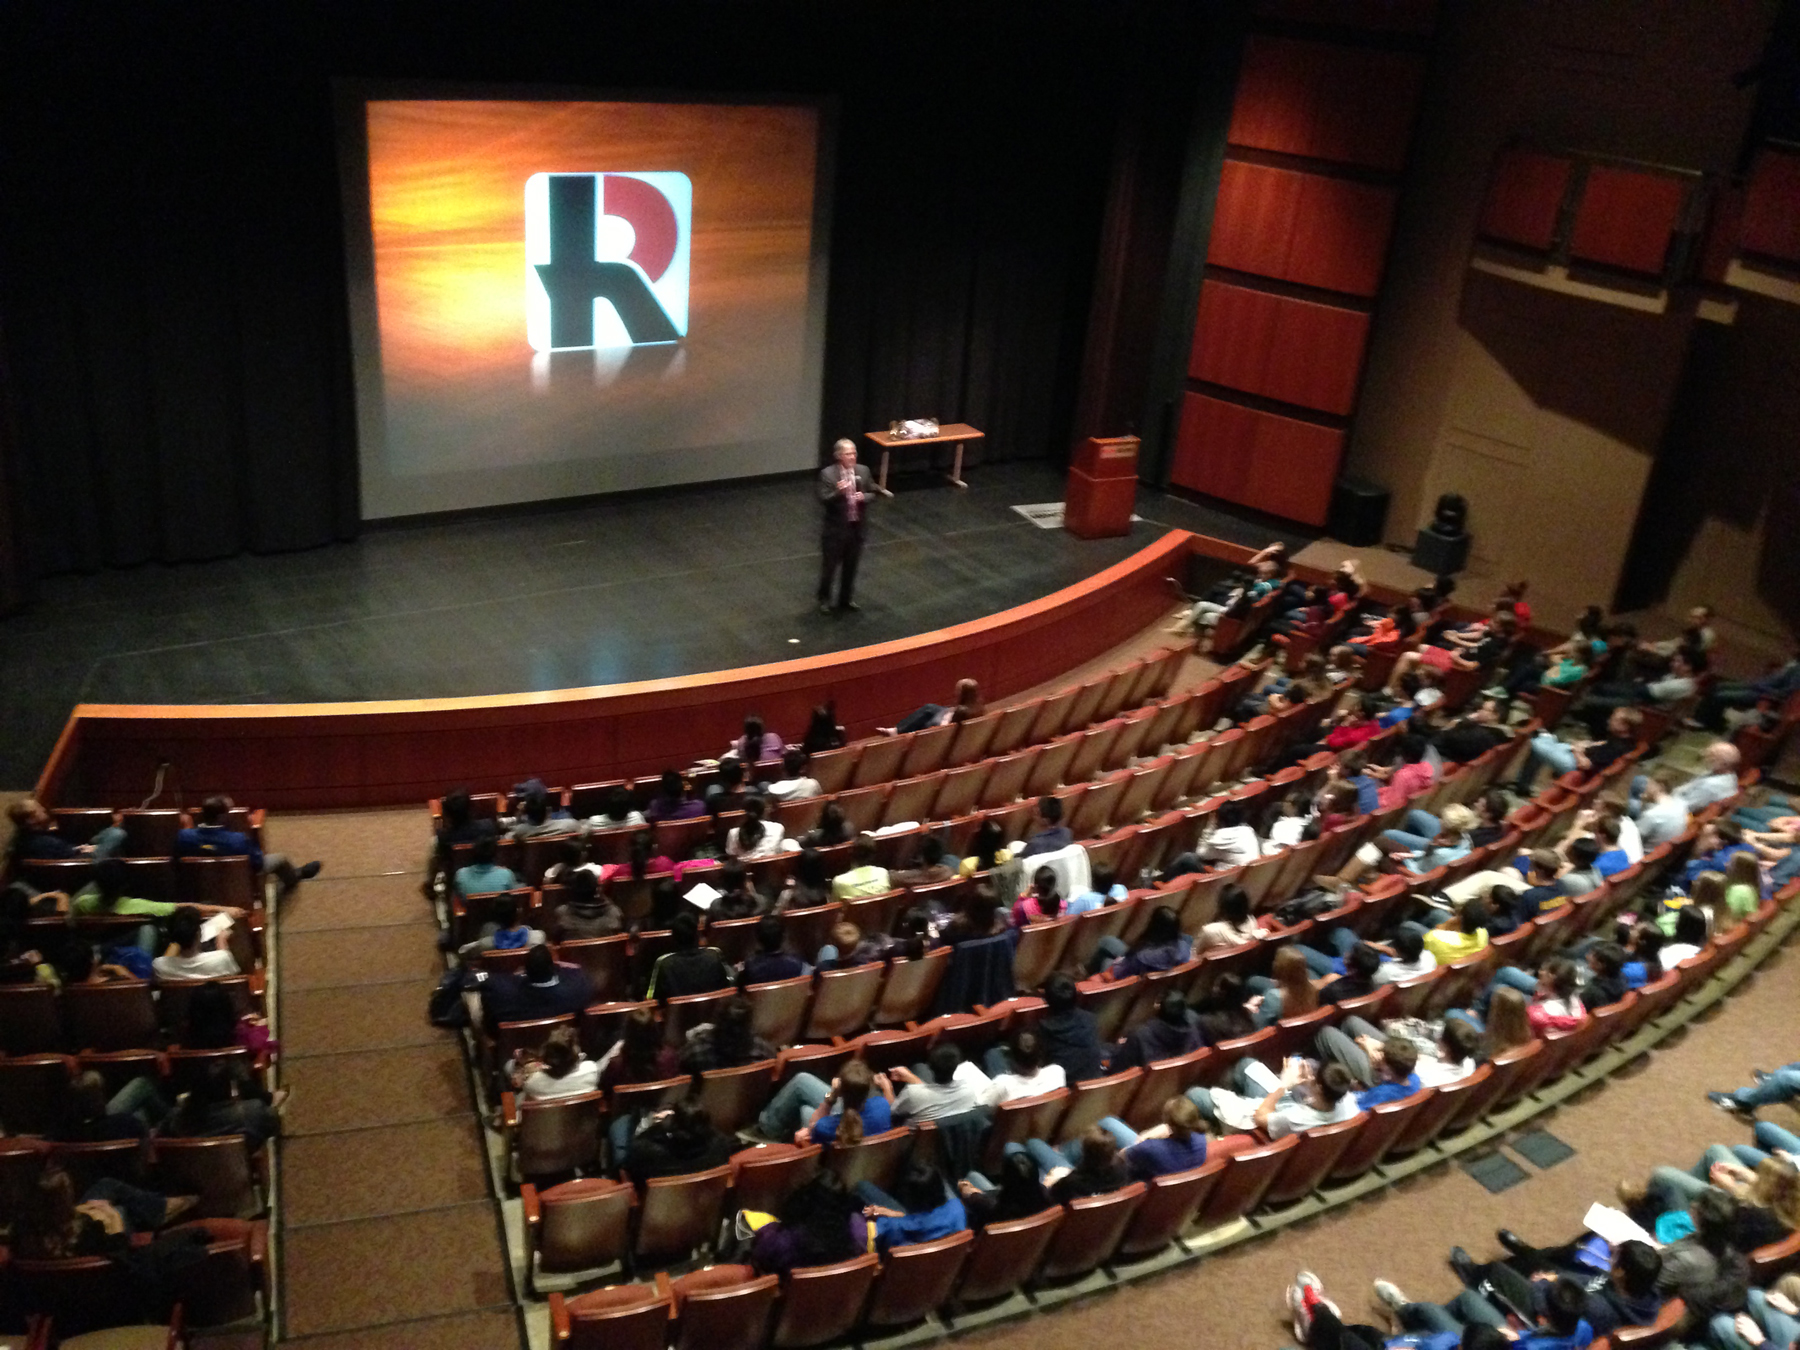 Rose-Hulman Vice President for Academic Affairs Dr. Phil Cornwell welcomes the students to Rose-Hulman